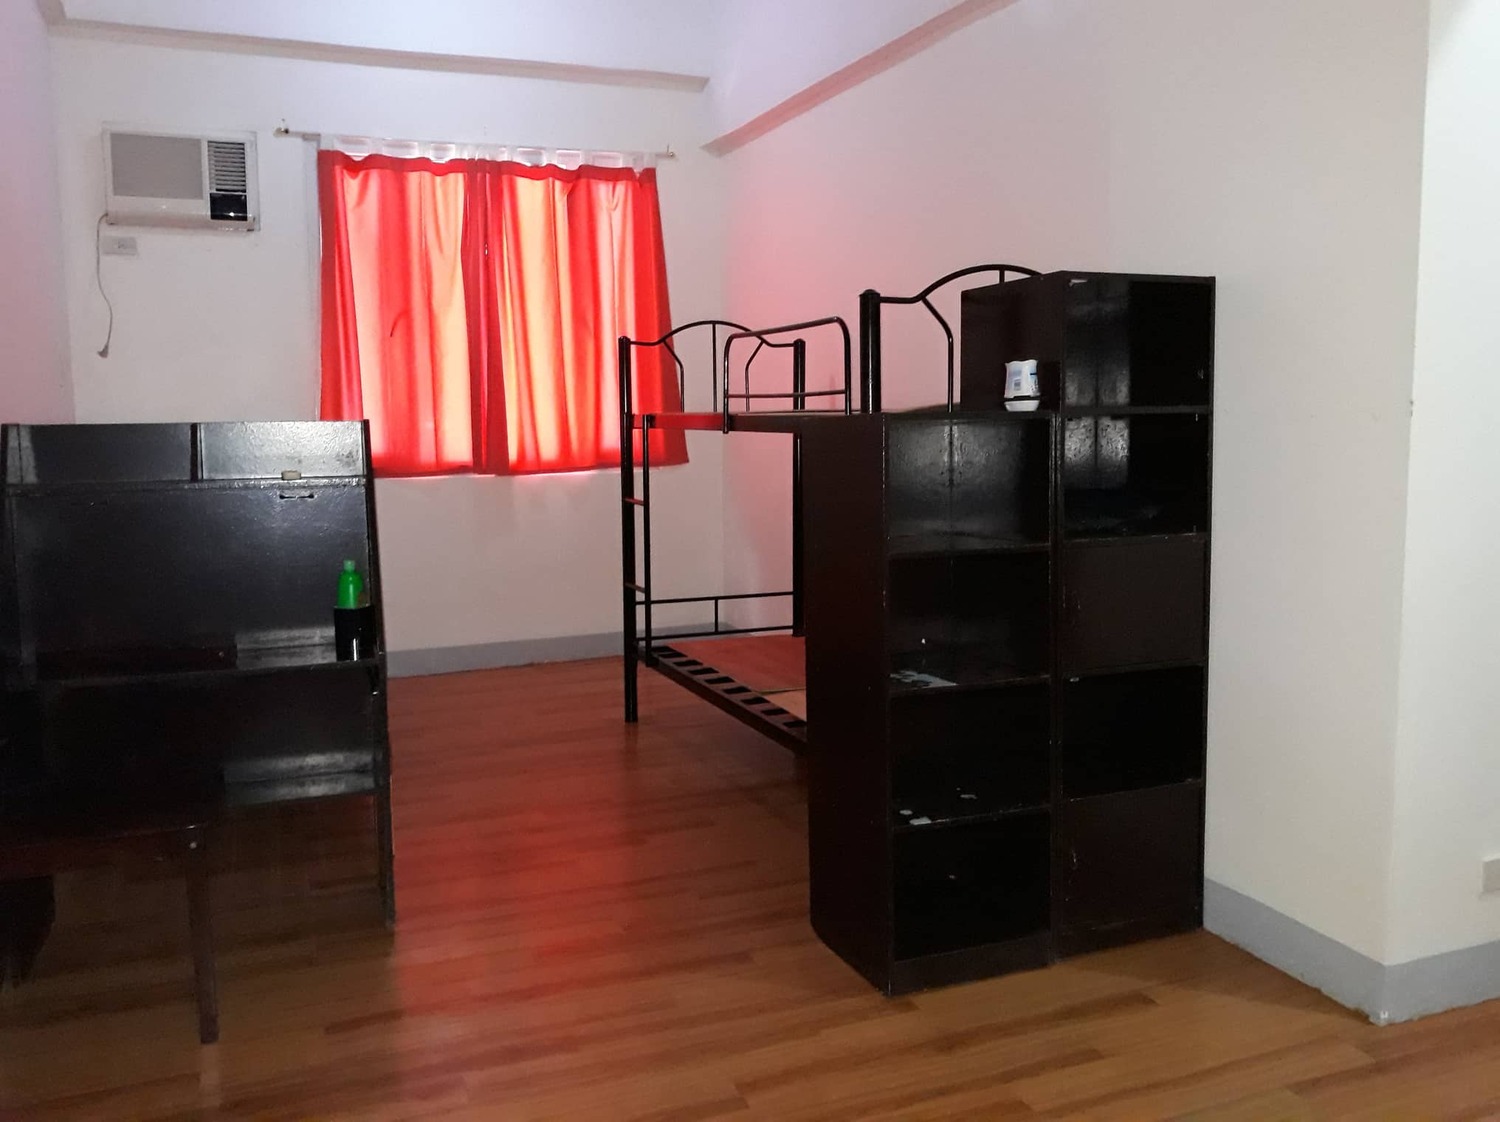 <span style="font-weight: bold;">Spacious Semi-Furnished L-Shaped Studio Unit</span><br>